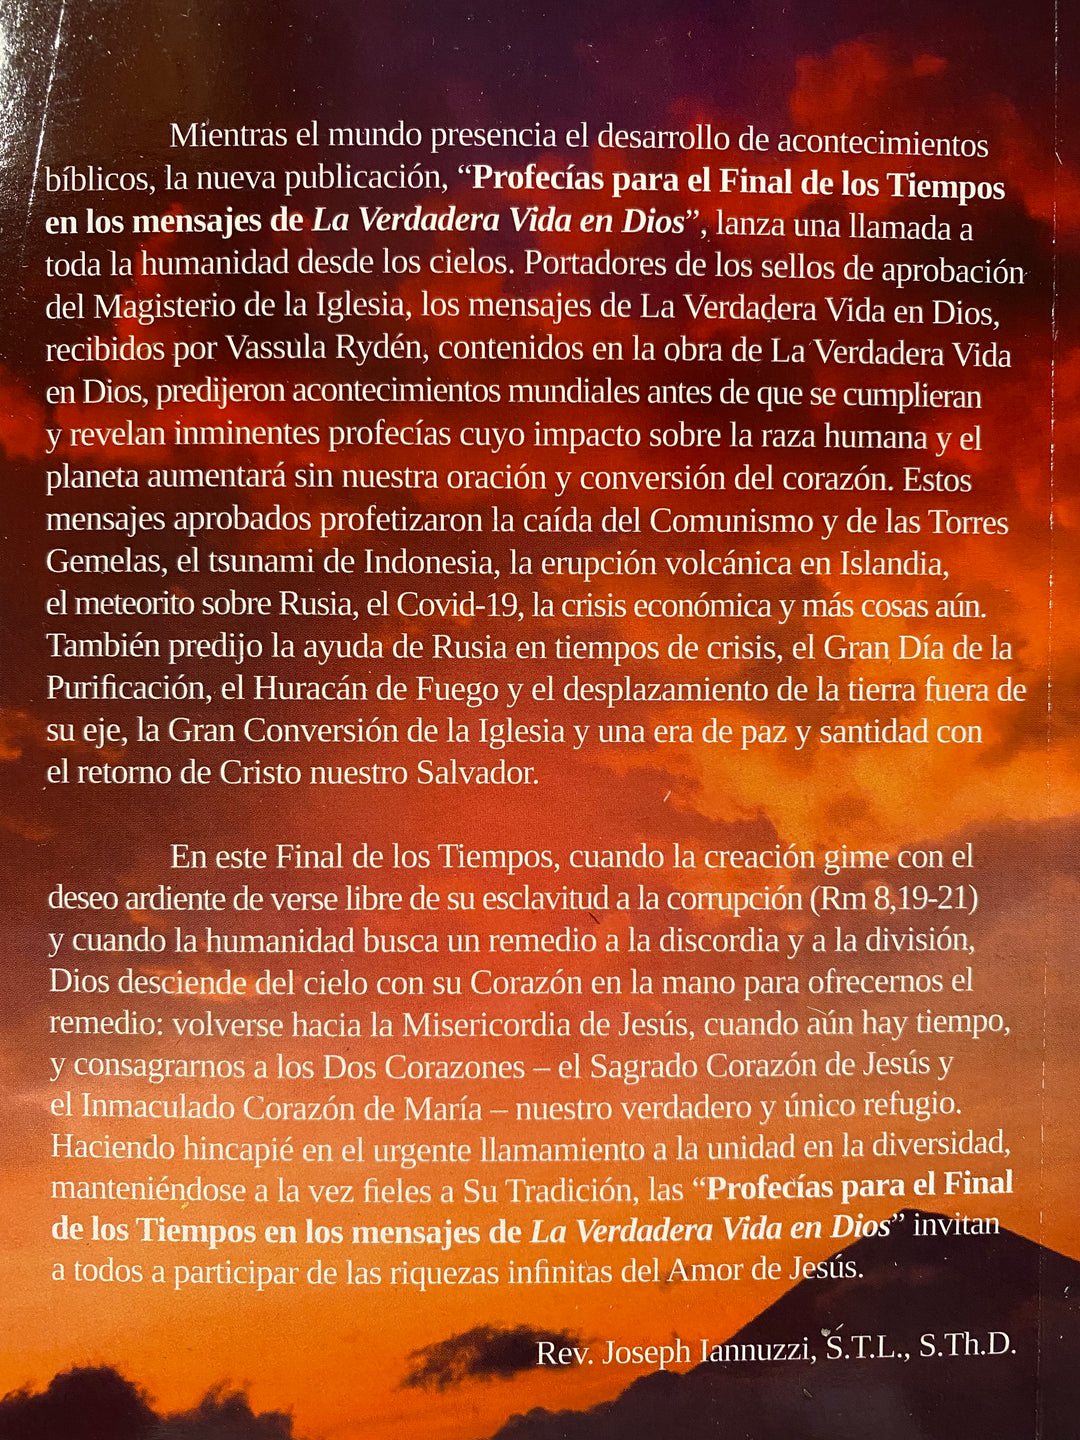 Spanish (Español) Prophecies in the True Life in God Messages for these End of Times